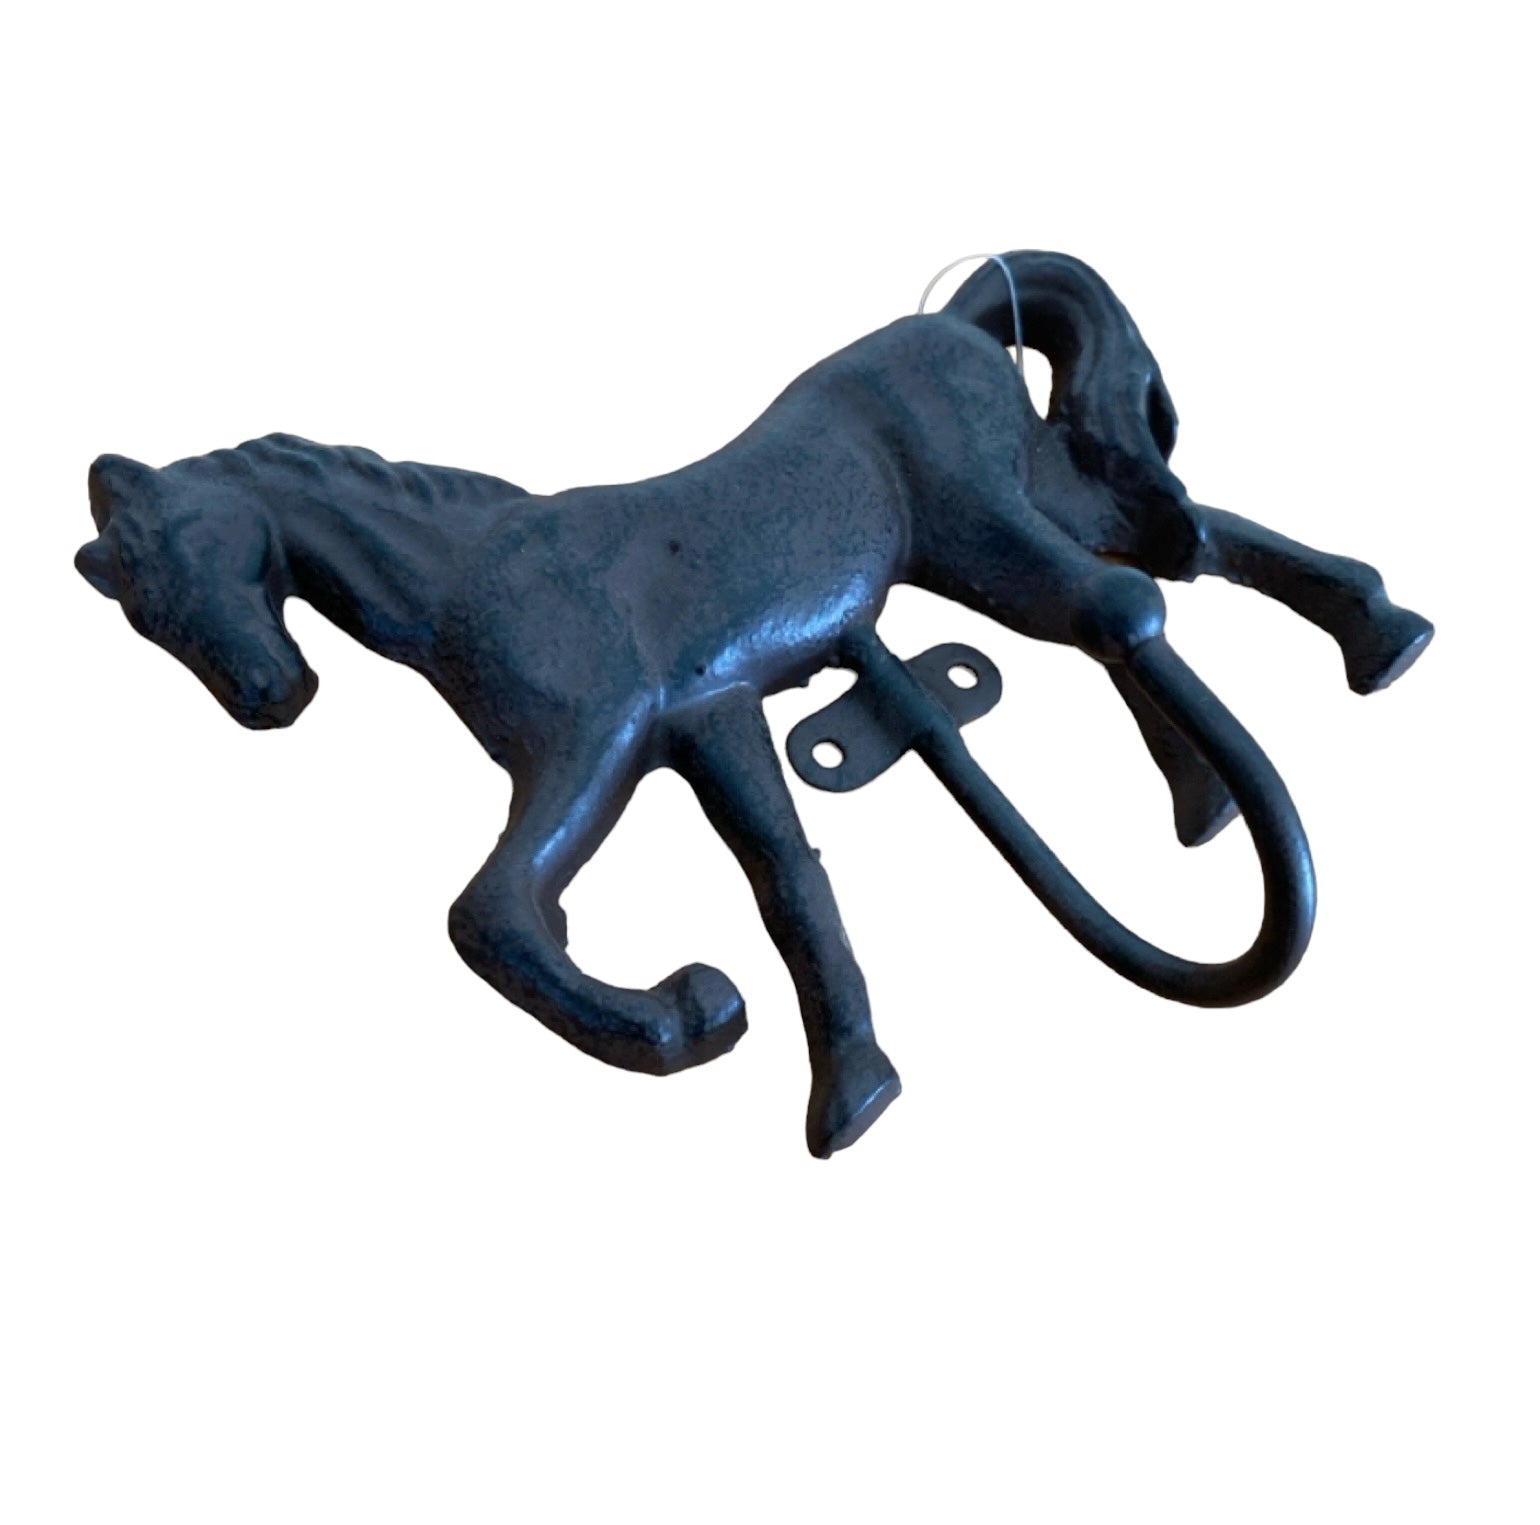 Horse Hook Rustic Cast Iron Prancing - The Renmy Store Homewares & Gifts 